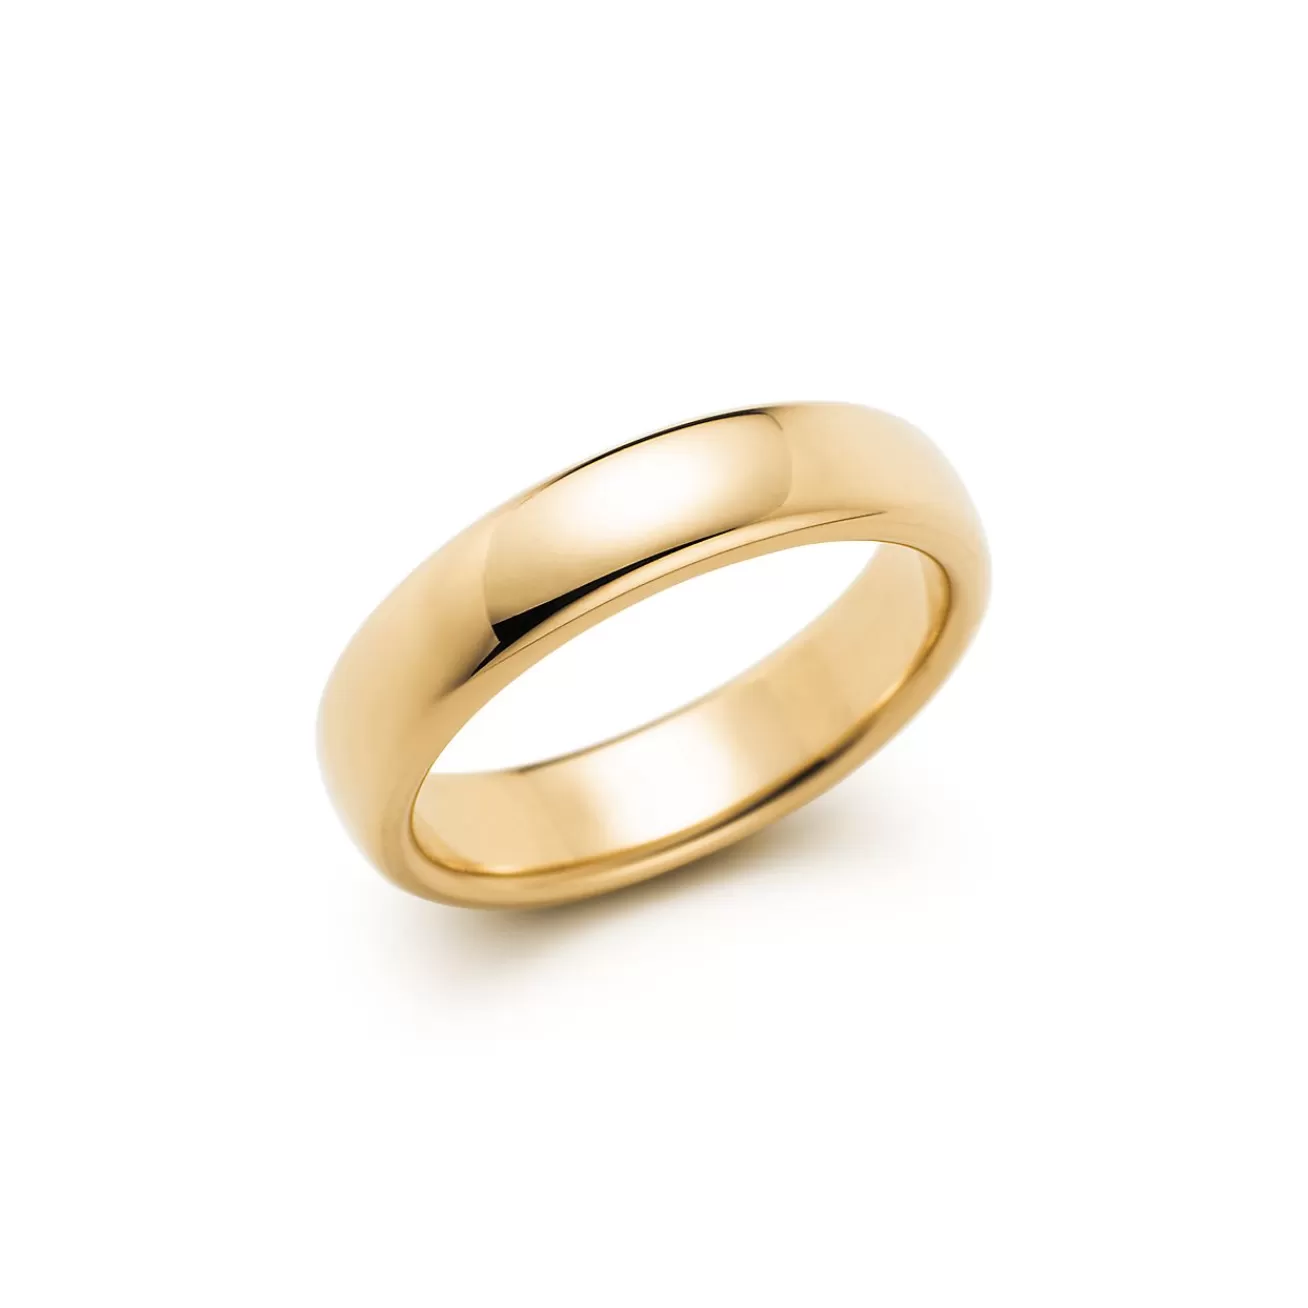 Tiffany & Co. Tiffany Forever Wedding Band Ring in Yellow Gold, 4.5 mm Wide | ^Women Rings | Gold Jewelry